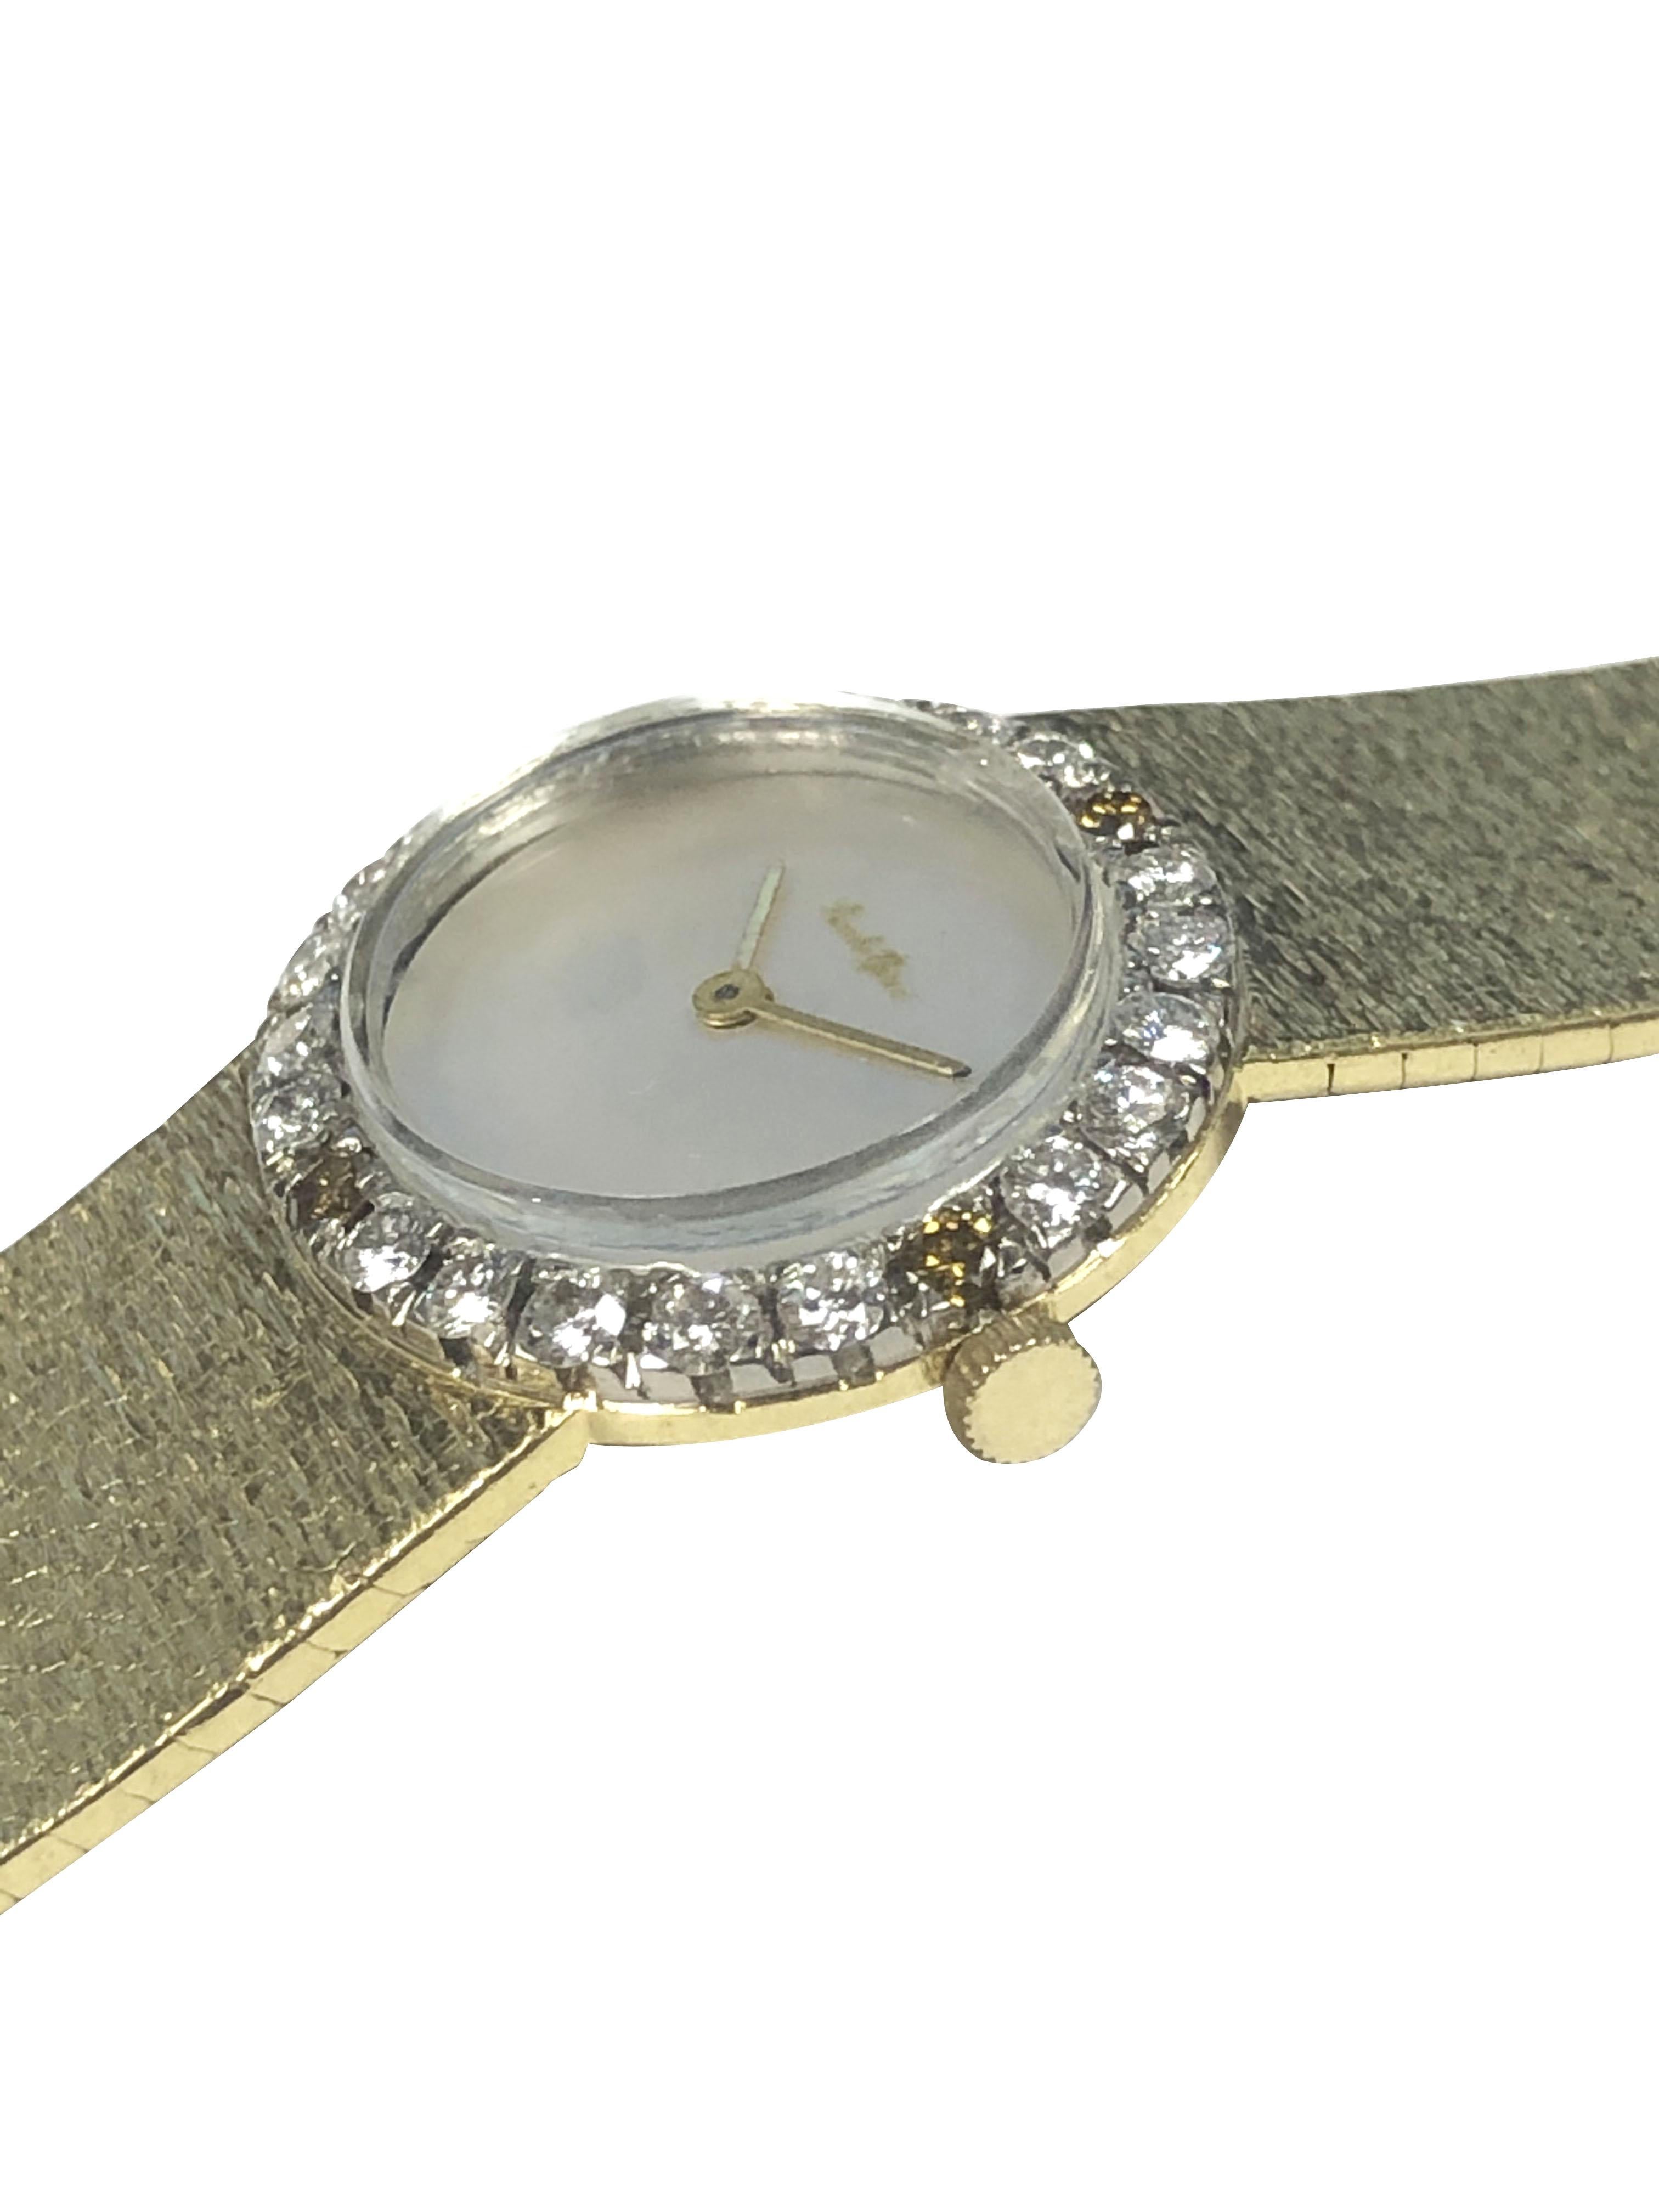 Circa 1980 Bueche Girod Ladies Wrist Watch, 26 X 22 M.M. 18K Yellow Gold 2 Piece case with a White Gold bezel of White and Cognac Round Brilliant cut Diamonds totaling 1 Carat, 17 Jewel mechanical, manual wind movement, Mother of Pearl Dial. 5/8